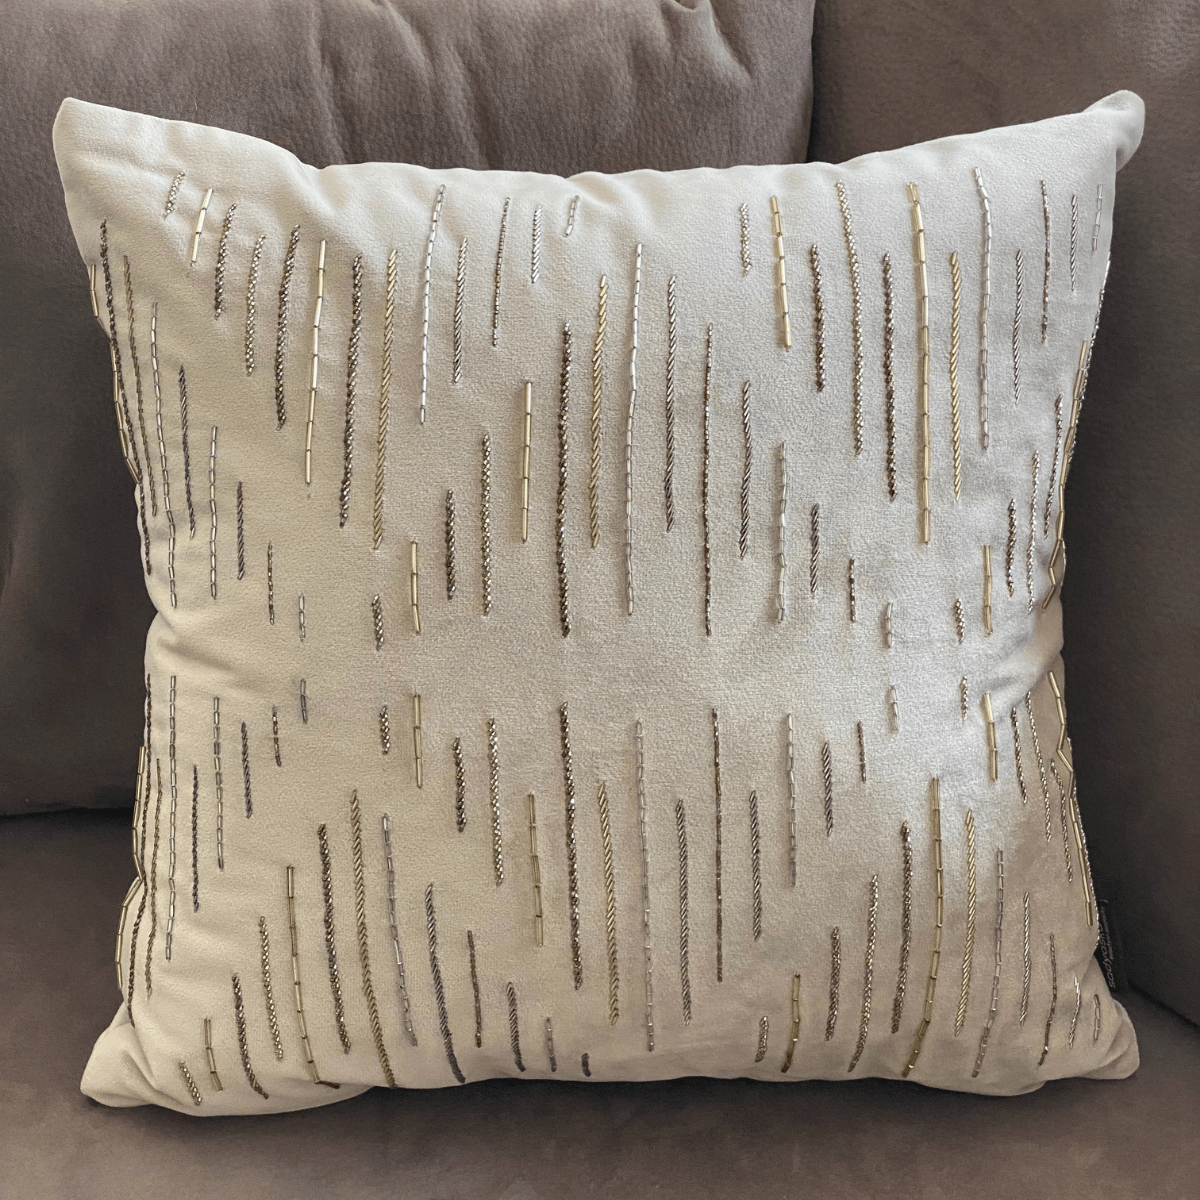 Decorative Delineate Champagne Gold Velvet Cushion Cover 16x16